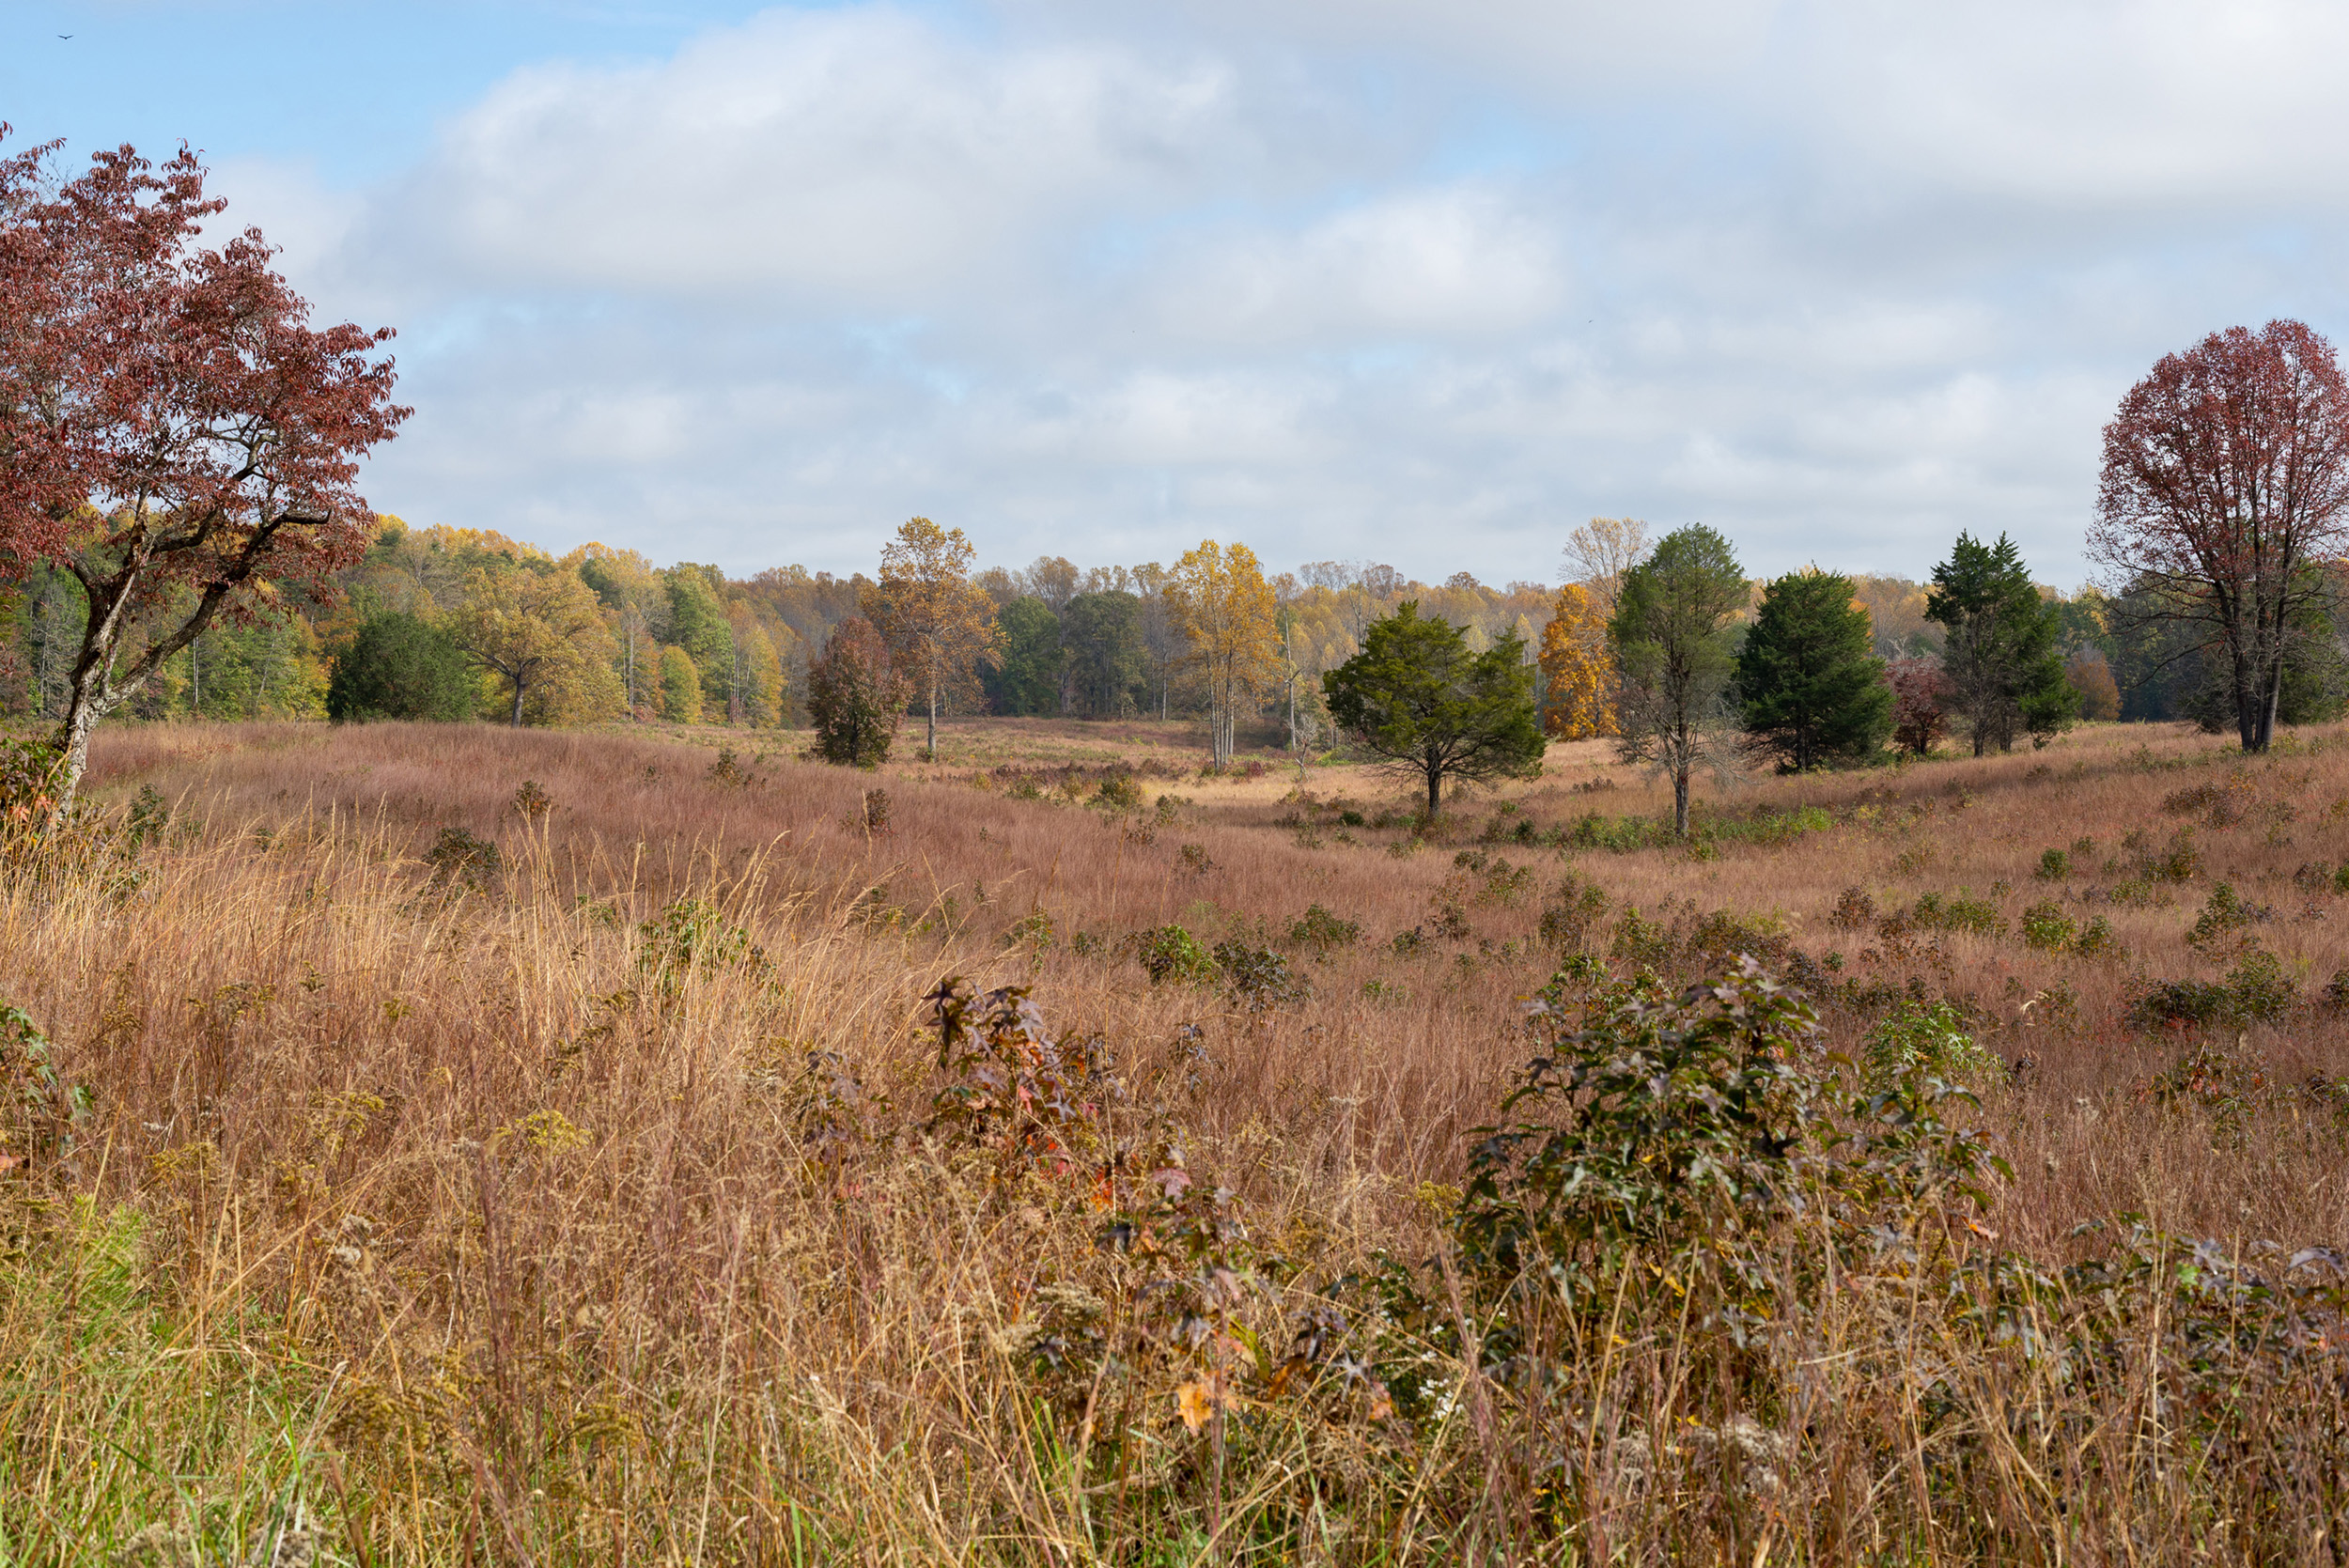 A concave shaped field in fall with a line of trees in the distance.